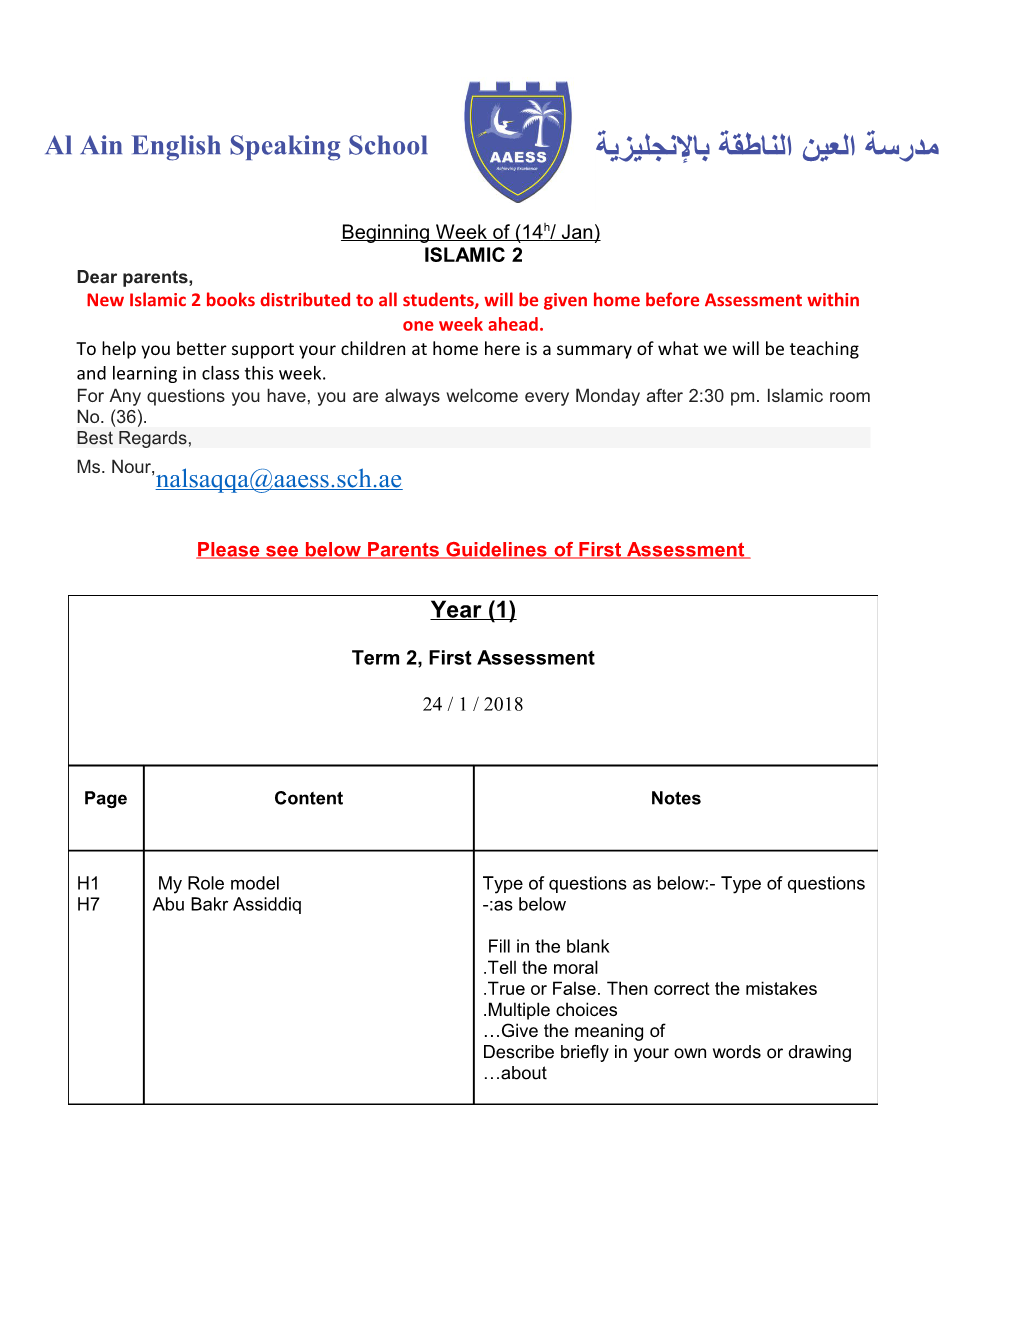 Please See Below Parents Guidelines of First Assessment